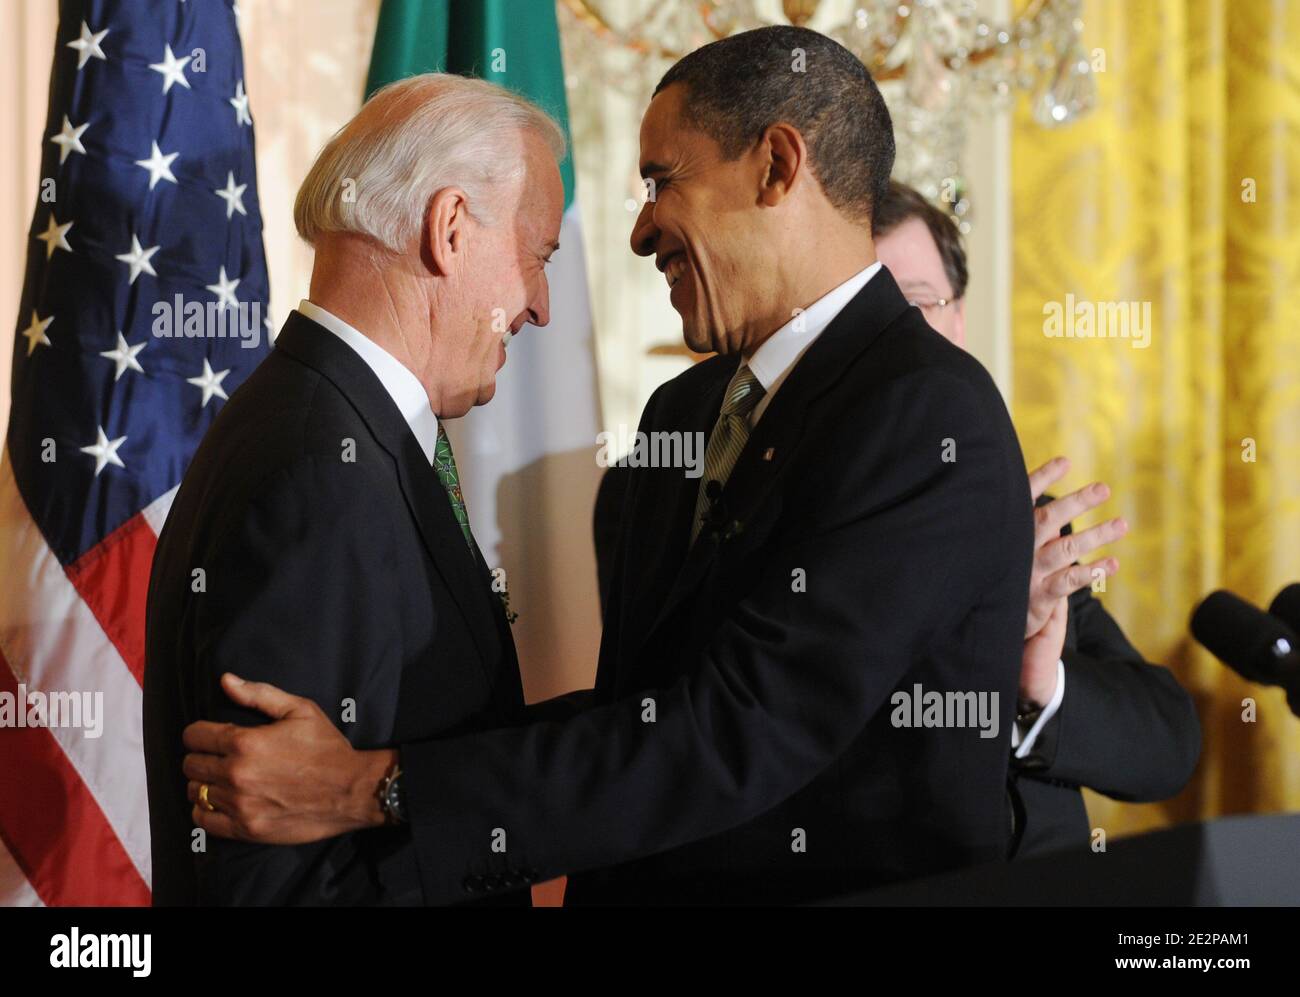 US President Barack Obama (R) and US Vice President Joe Biden (L) greet one another beside the podium during the annual St. Patrick's Day Reception in the East Room of the White House, in Washington DC, USA, on March 17, 2010. President Obama and the Prime Minister (Taoiseach) of Ireland Brian Cowen delivered remarks and participated in a traditional Shamrock ceremony. Photo by Michael Reynolds/Pool/ABACAPRESS.COM Stock Photo